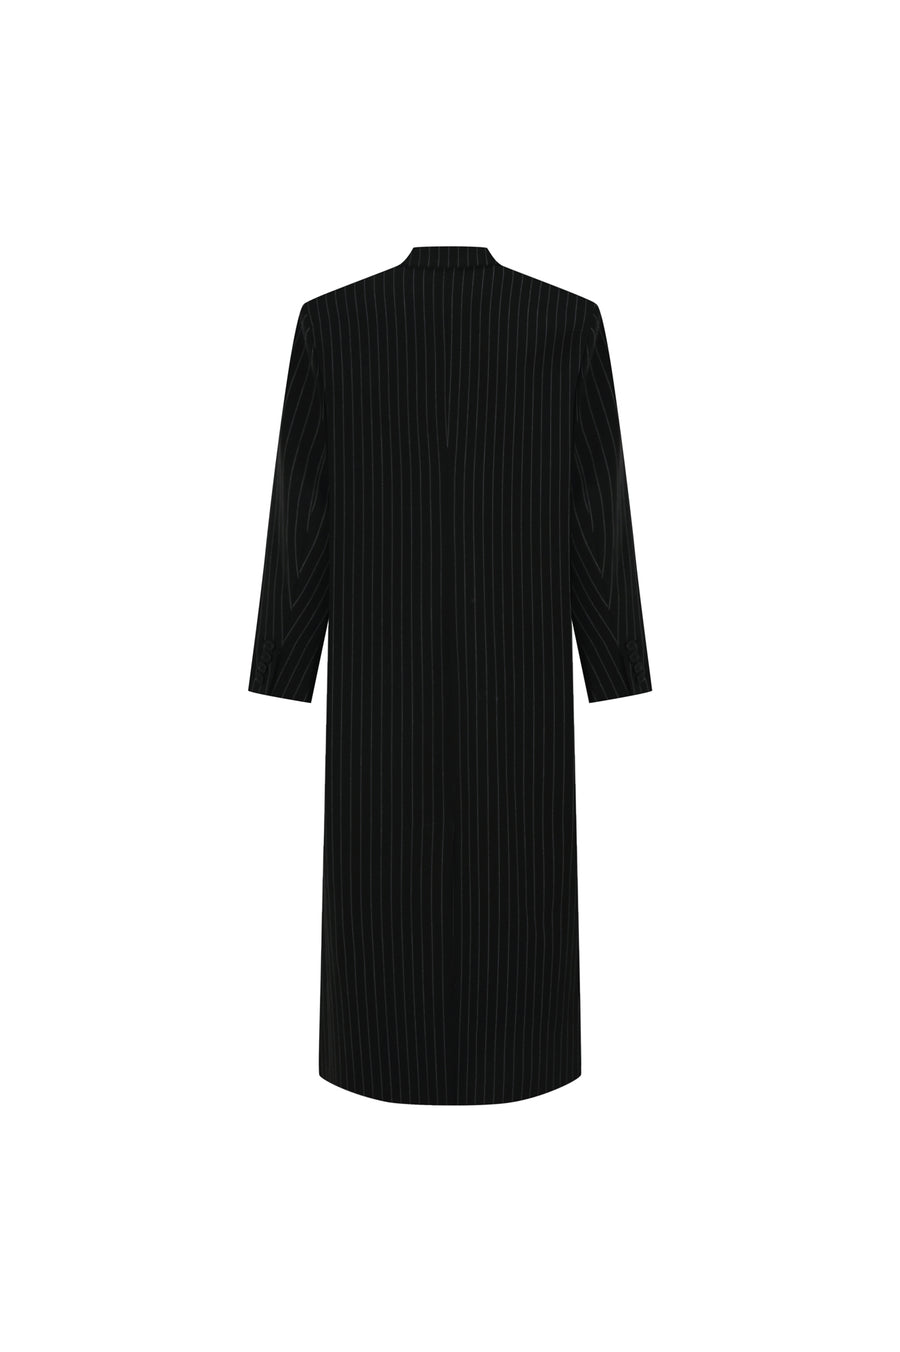 The Gerom striped trenchcoat